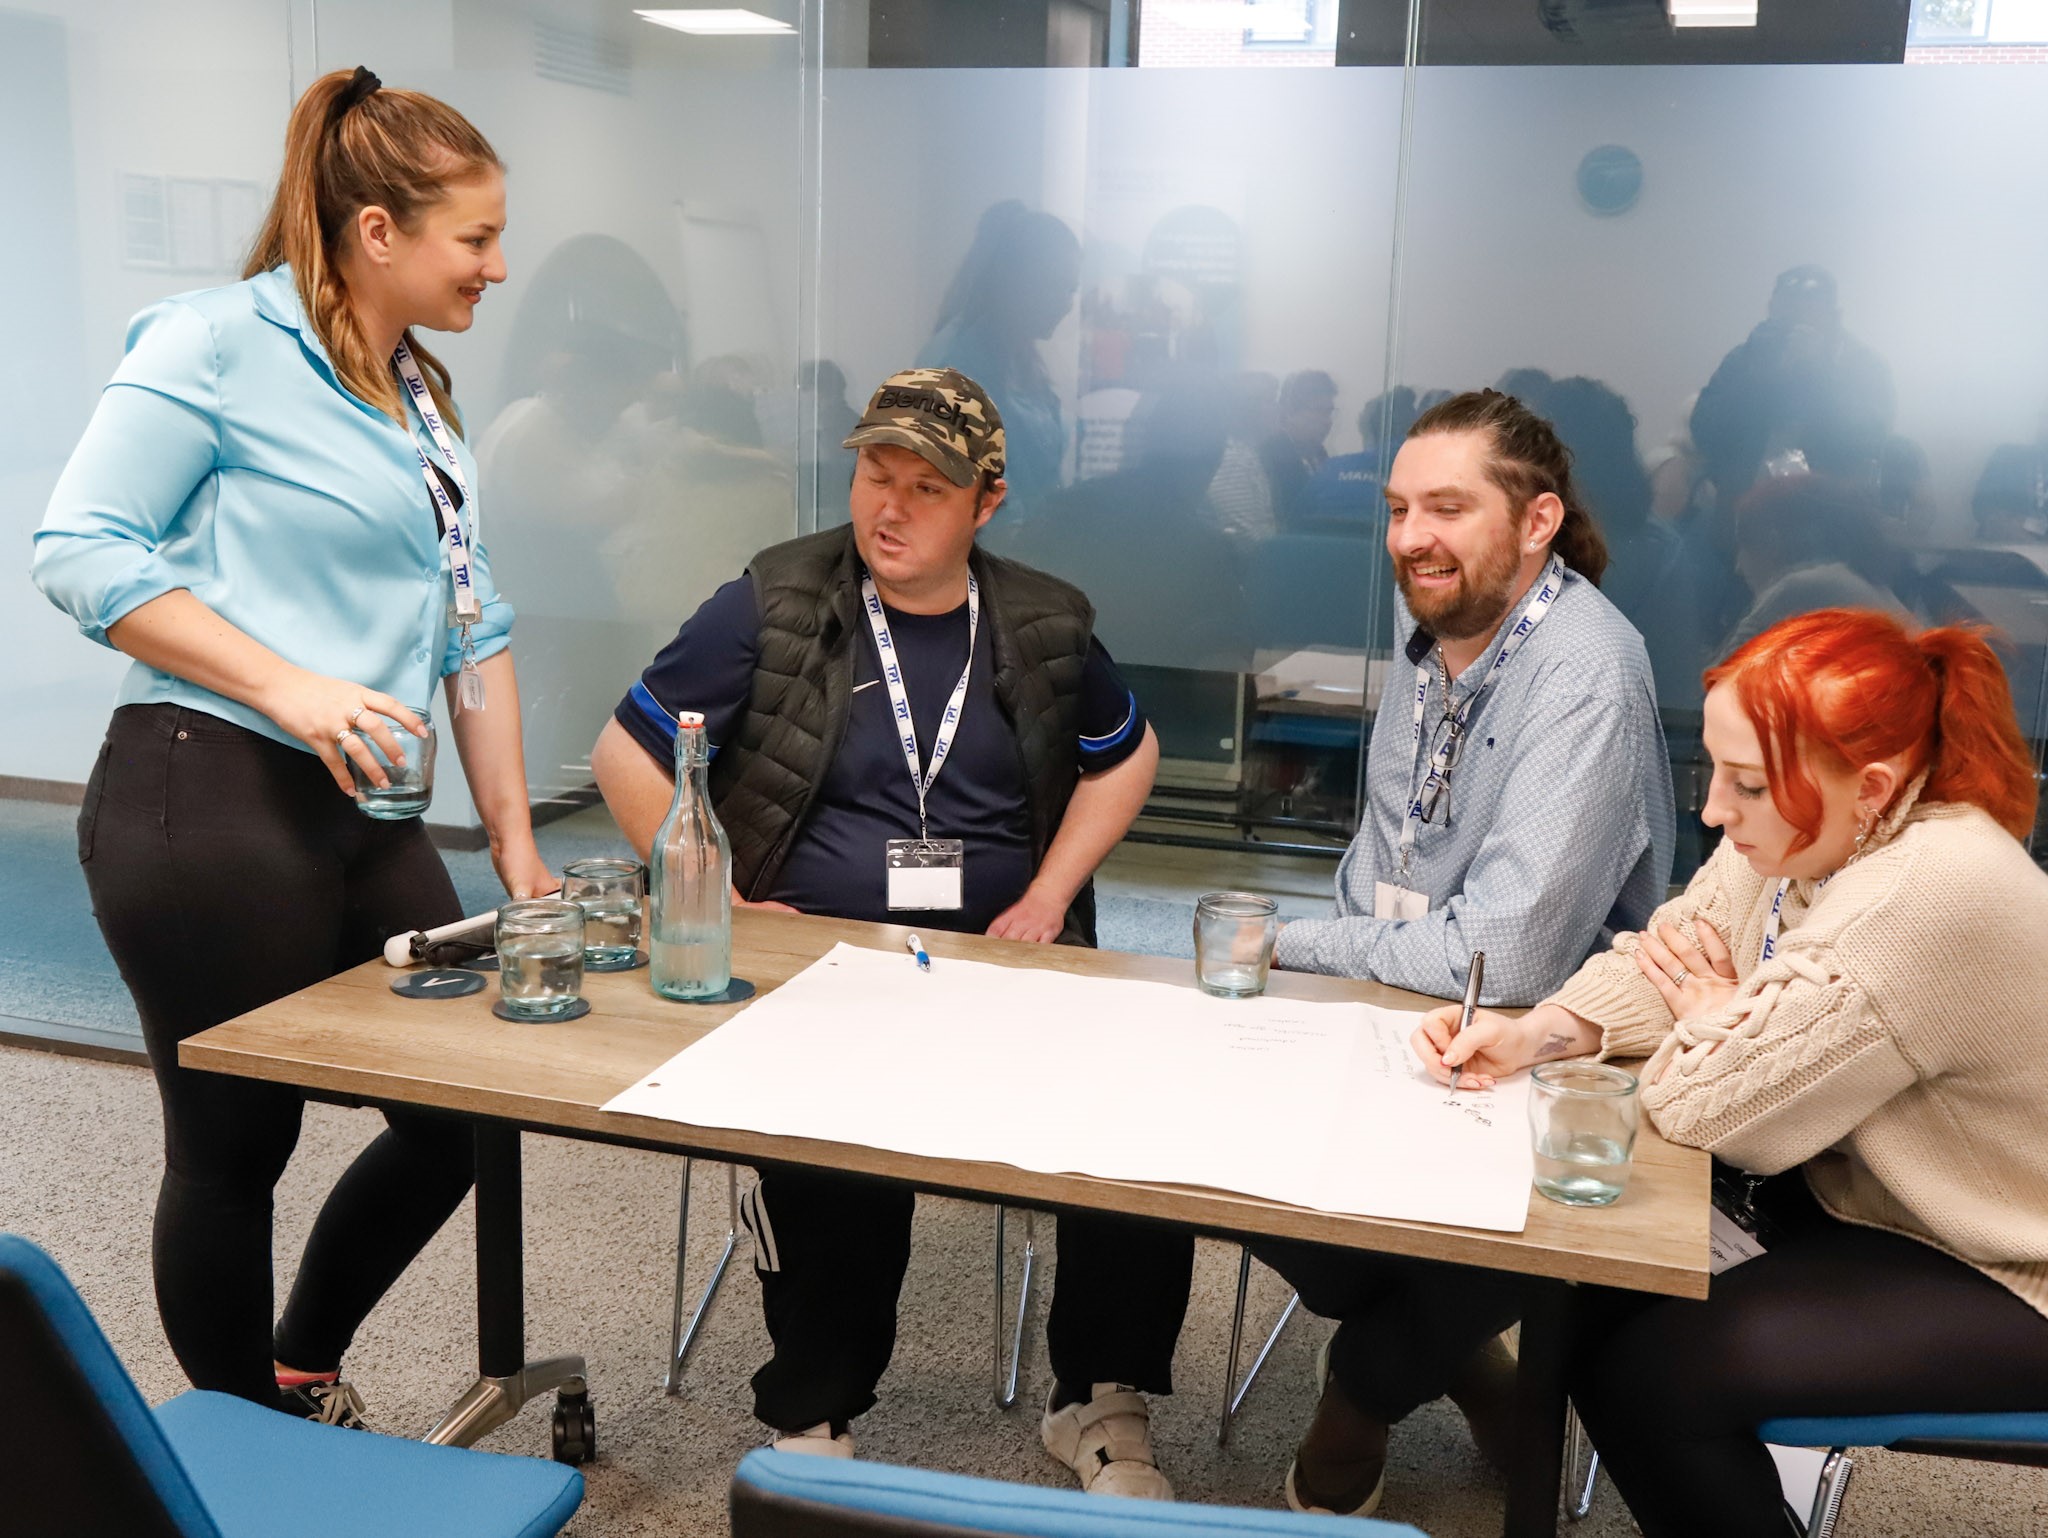 Belle Whitely, SLC coordinator for Yorkshire and Humberside, pictured talking to Matty Bolam, SLC member, jack Moffat, Engagement Manager for the north east, and Becky, a support worker who is taking notes, during the sports project session.